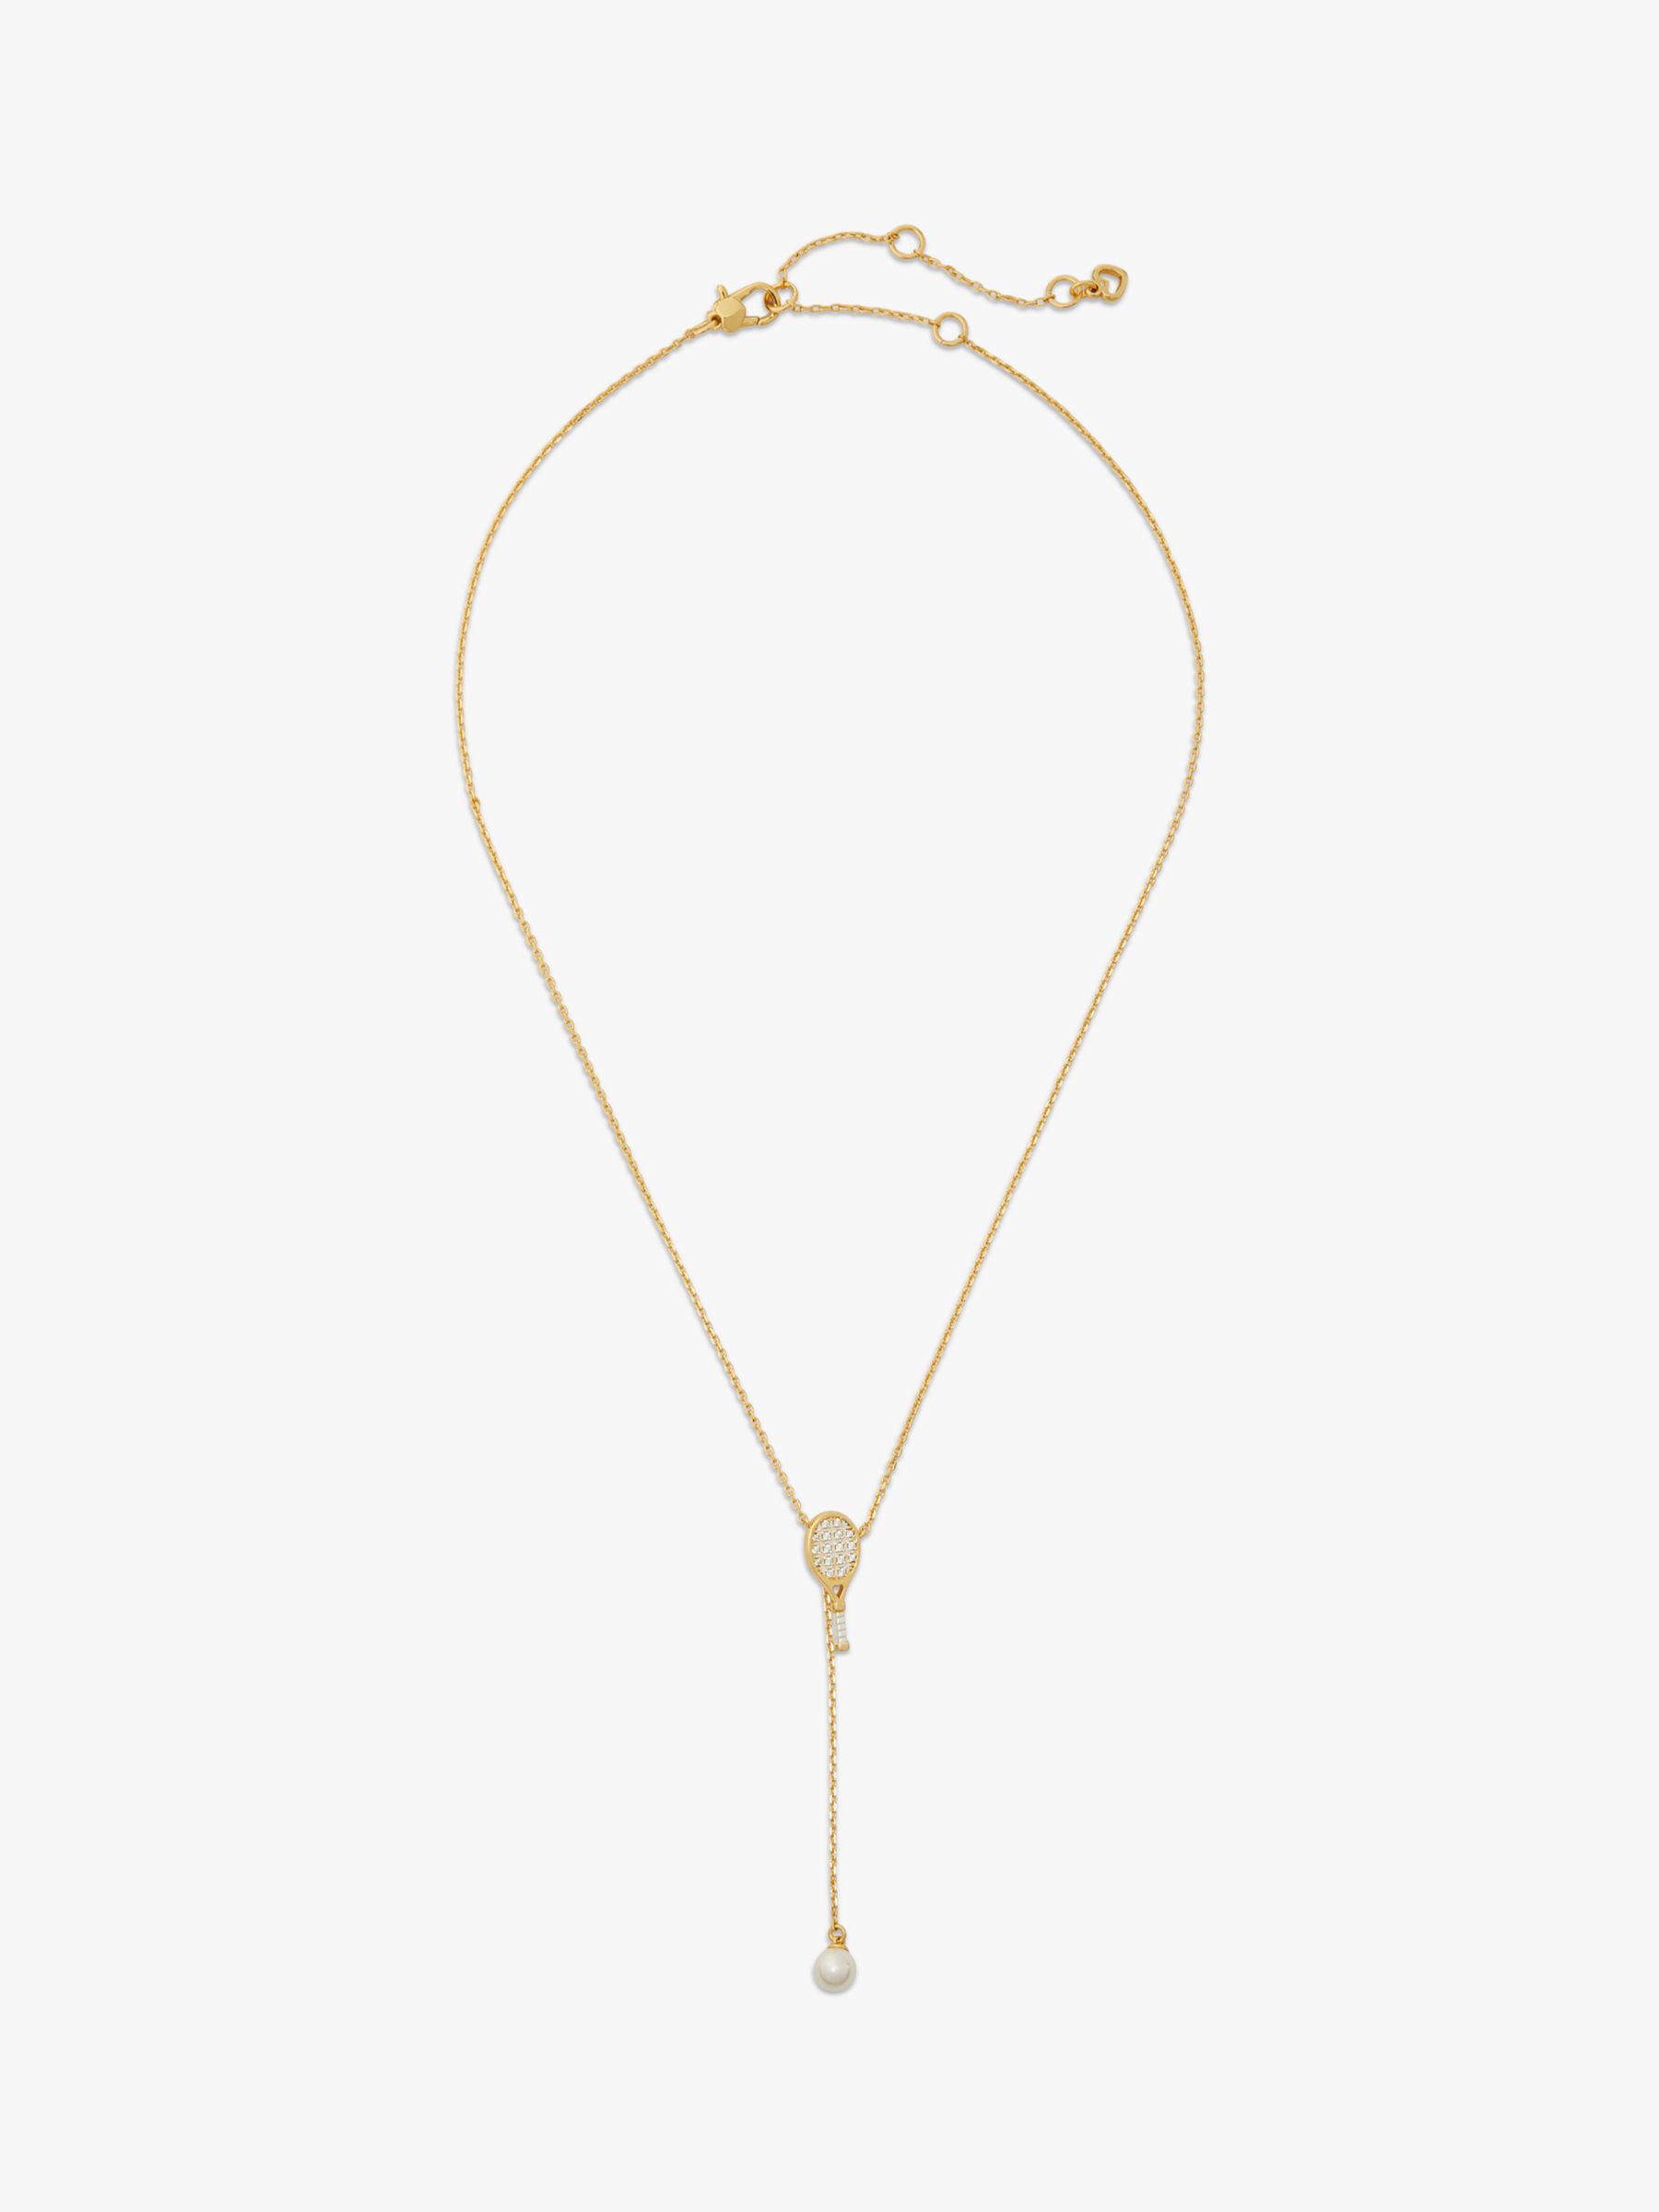 kate spade new york Cubic Zirconia & Faux Pearl Tennis Necklace, Gold